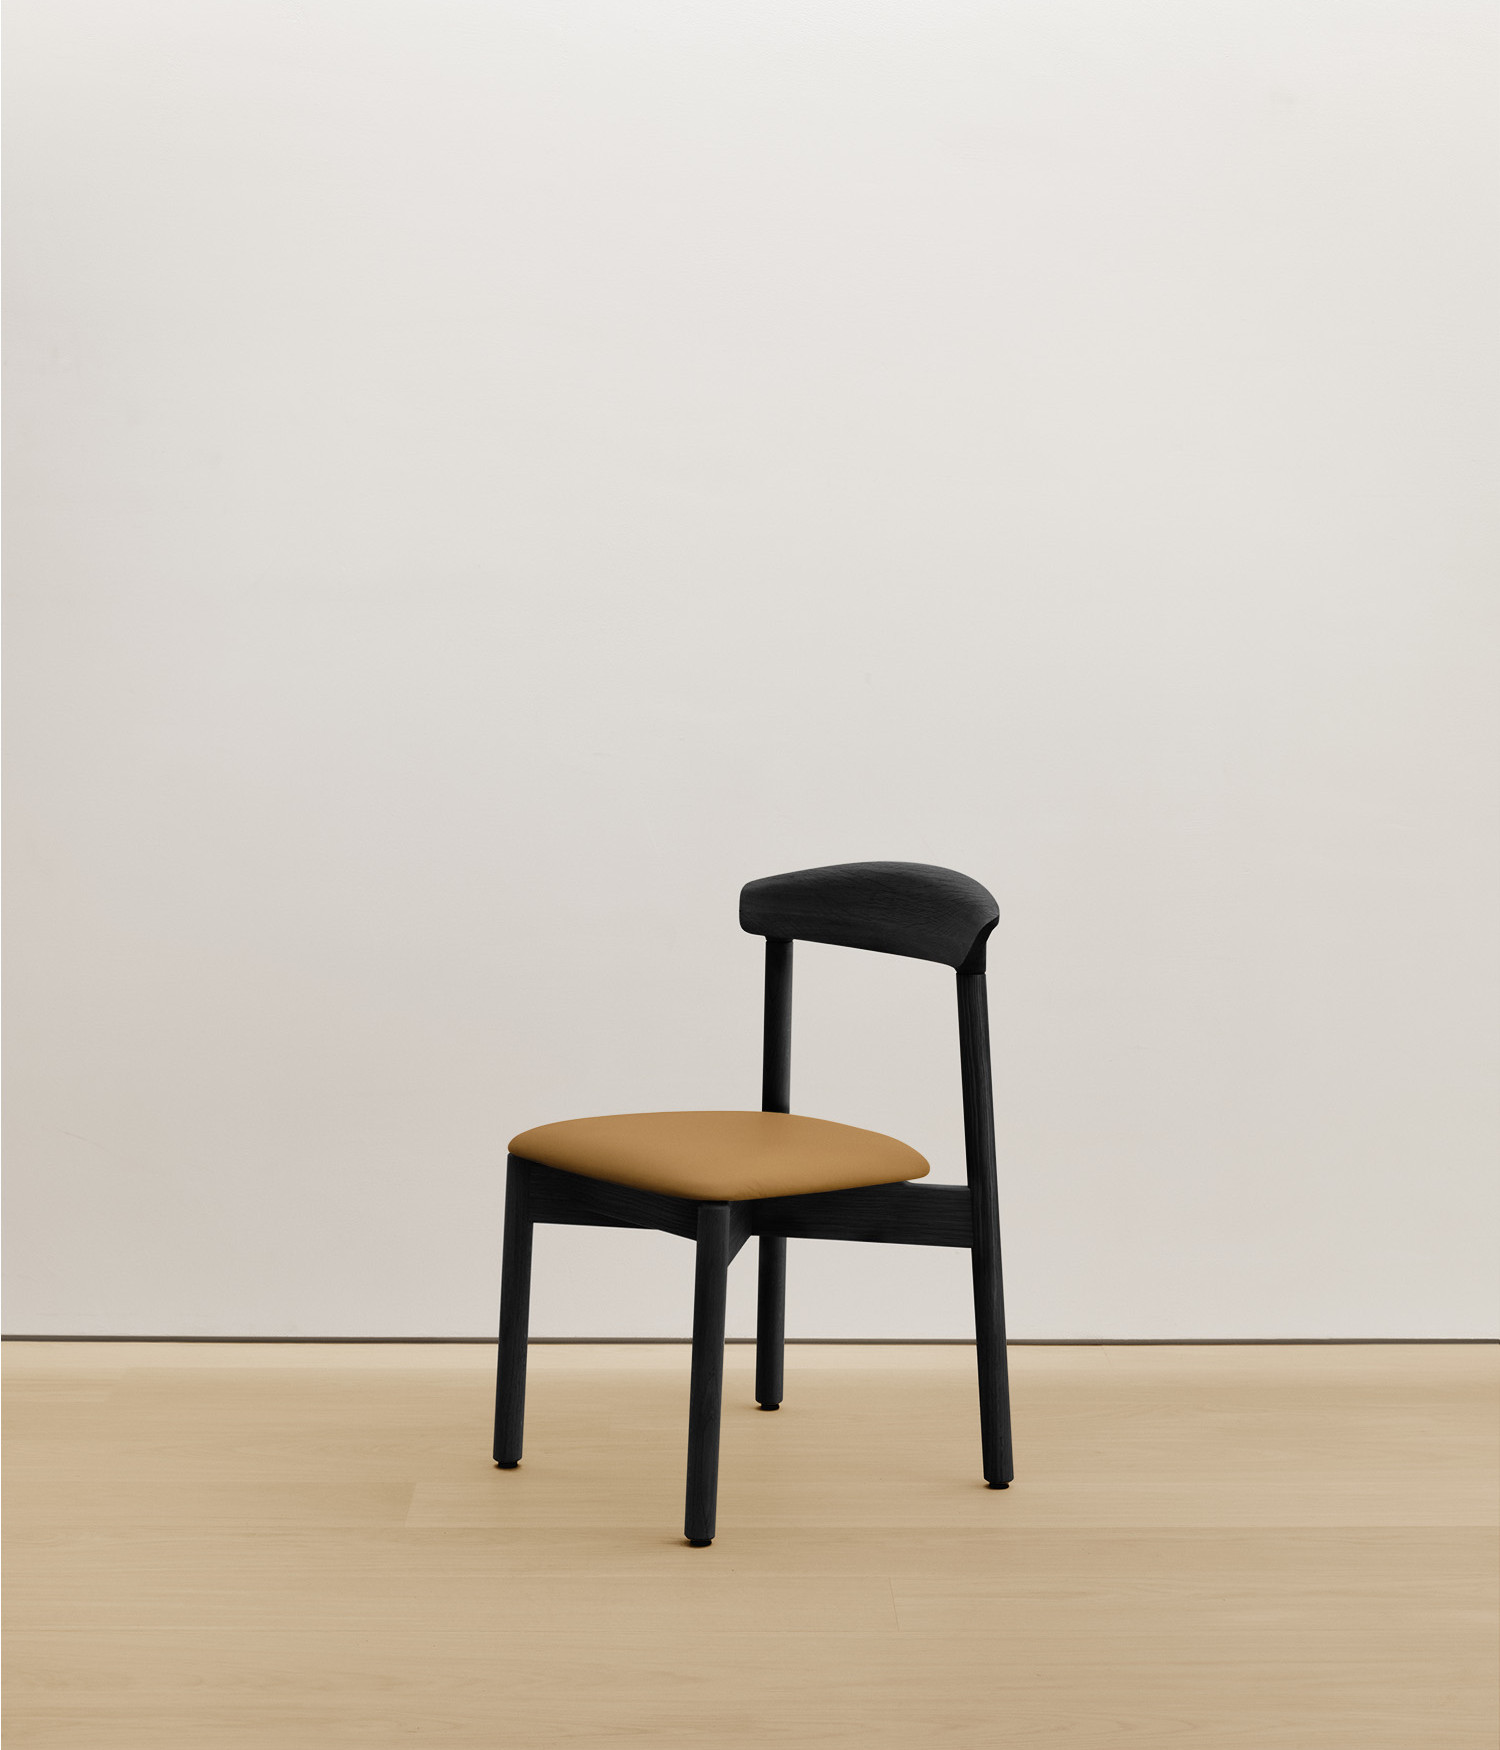  black-stained-oak chair with tan color upholstered seat 